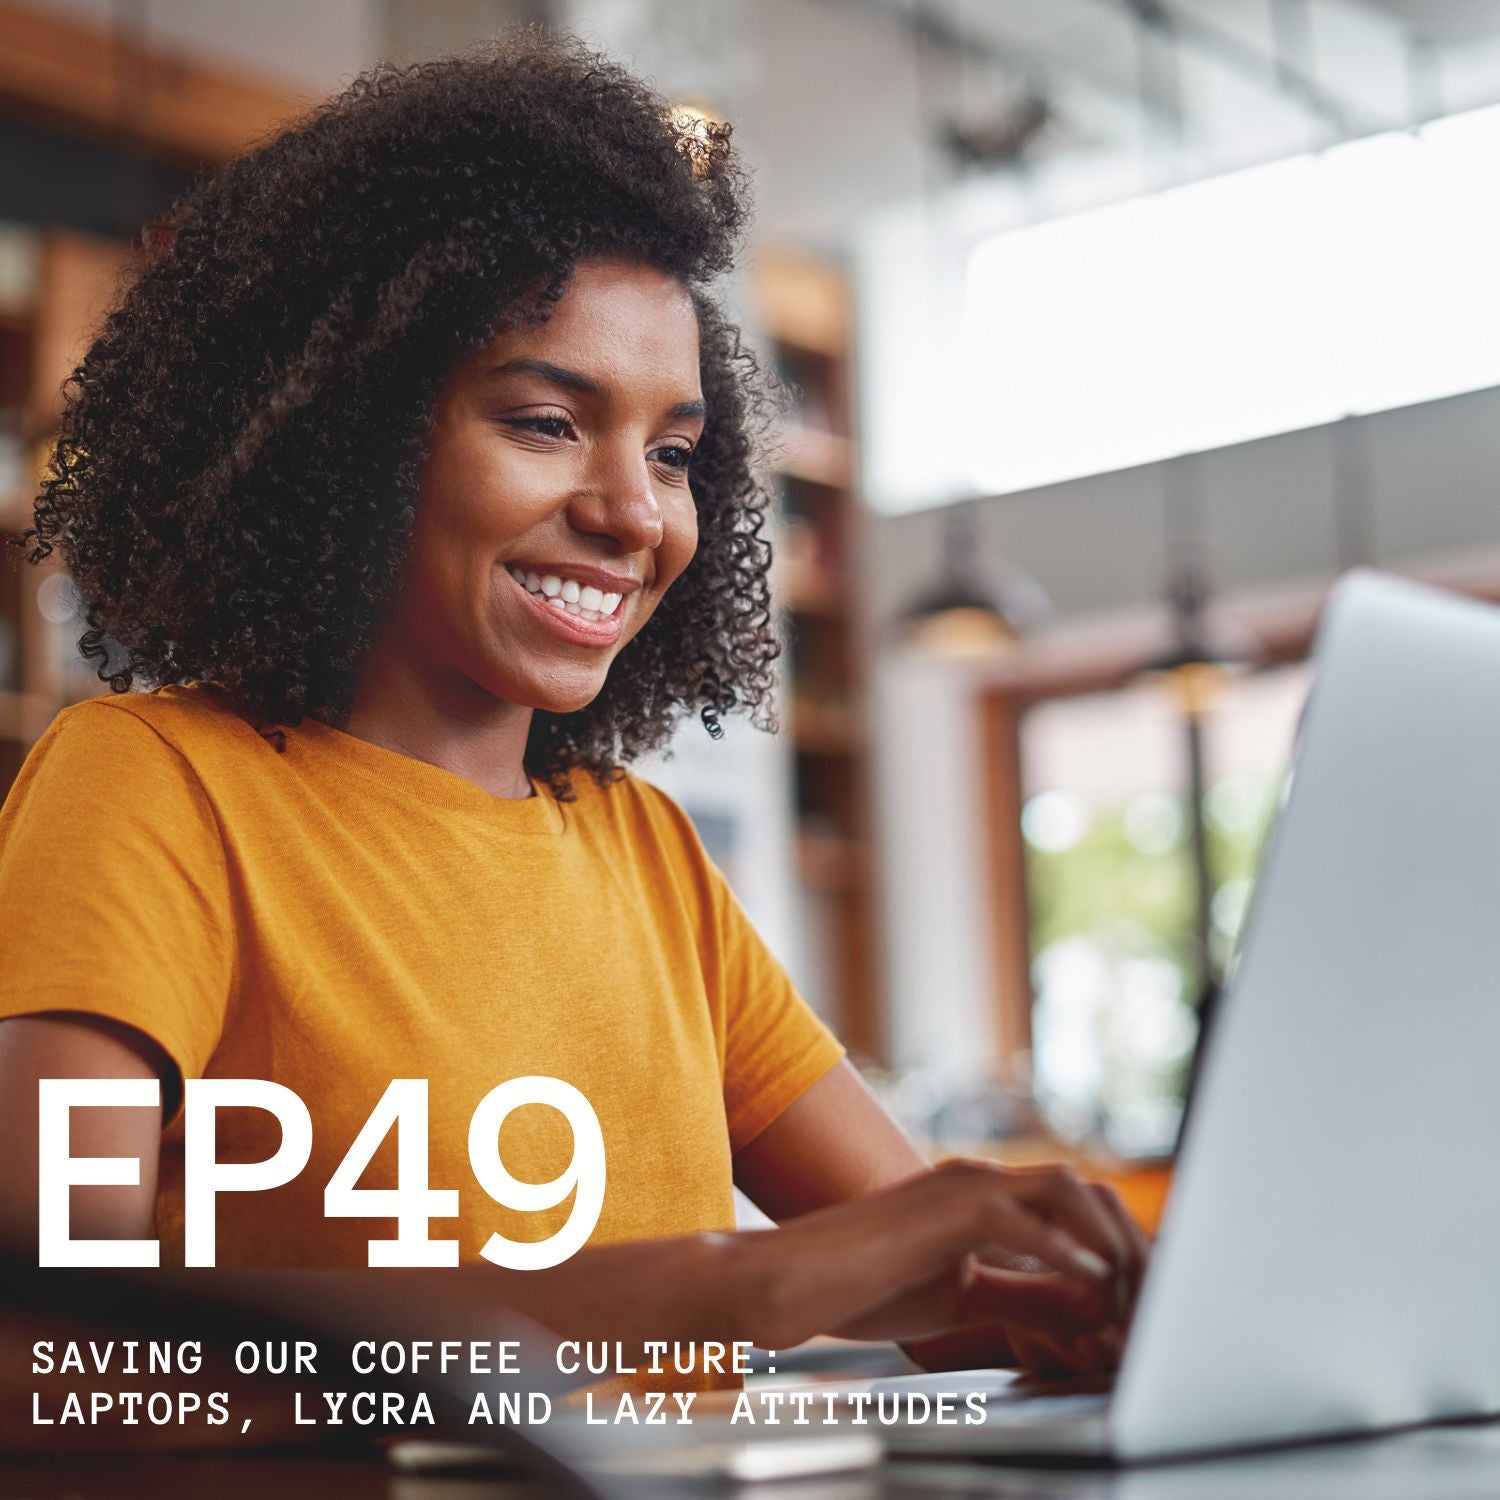 Episode 49 - Saving Our Coffee Culture: Laptops, Lycra and Lazy Attitudes